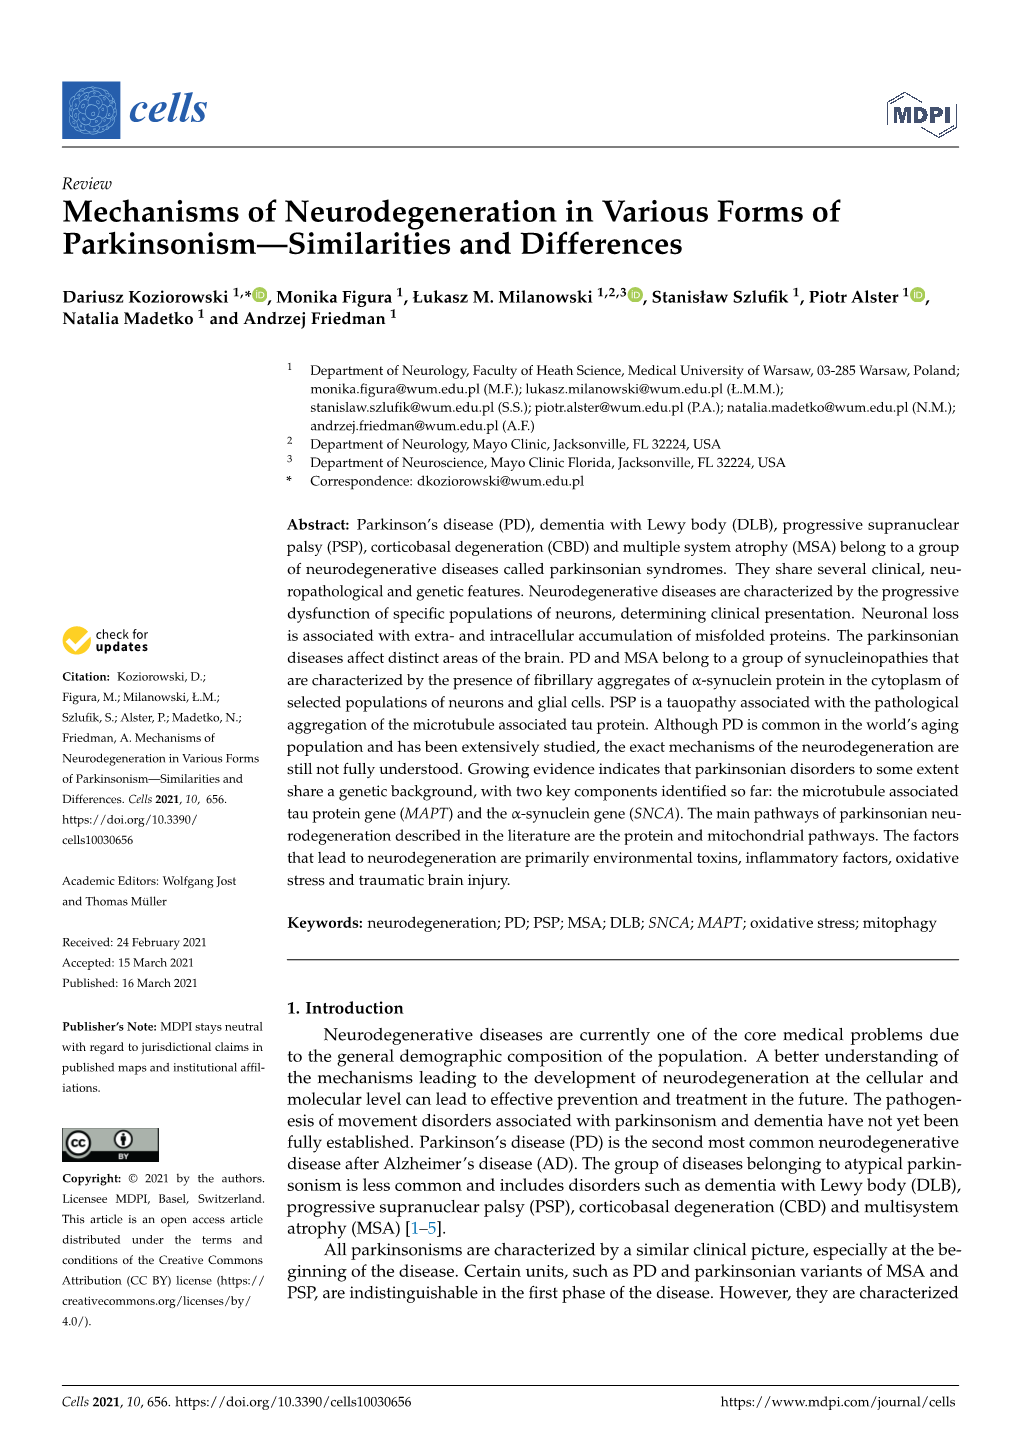 Mechanisms of Neurodegeneration in Various Forms of Parkinsonism—Similarities and Differences